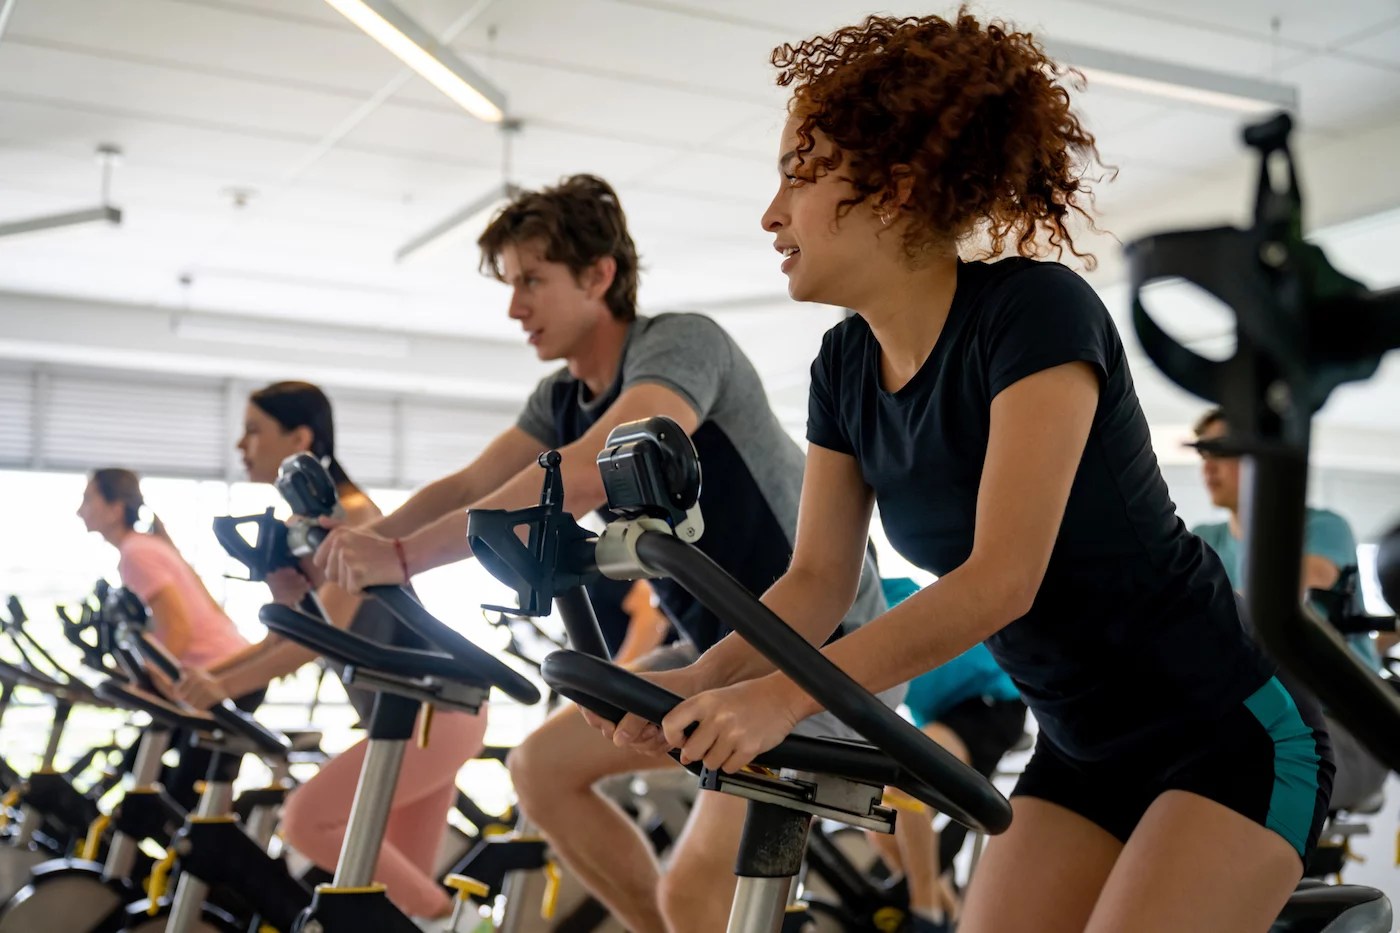 People in a spin class. Here's why group fitness classes can feel defeating